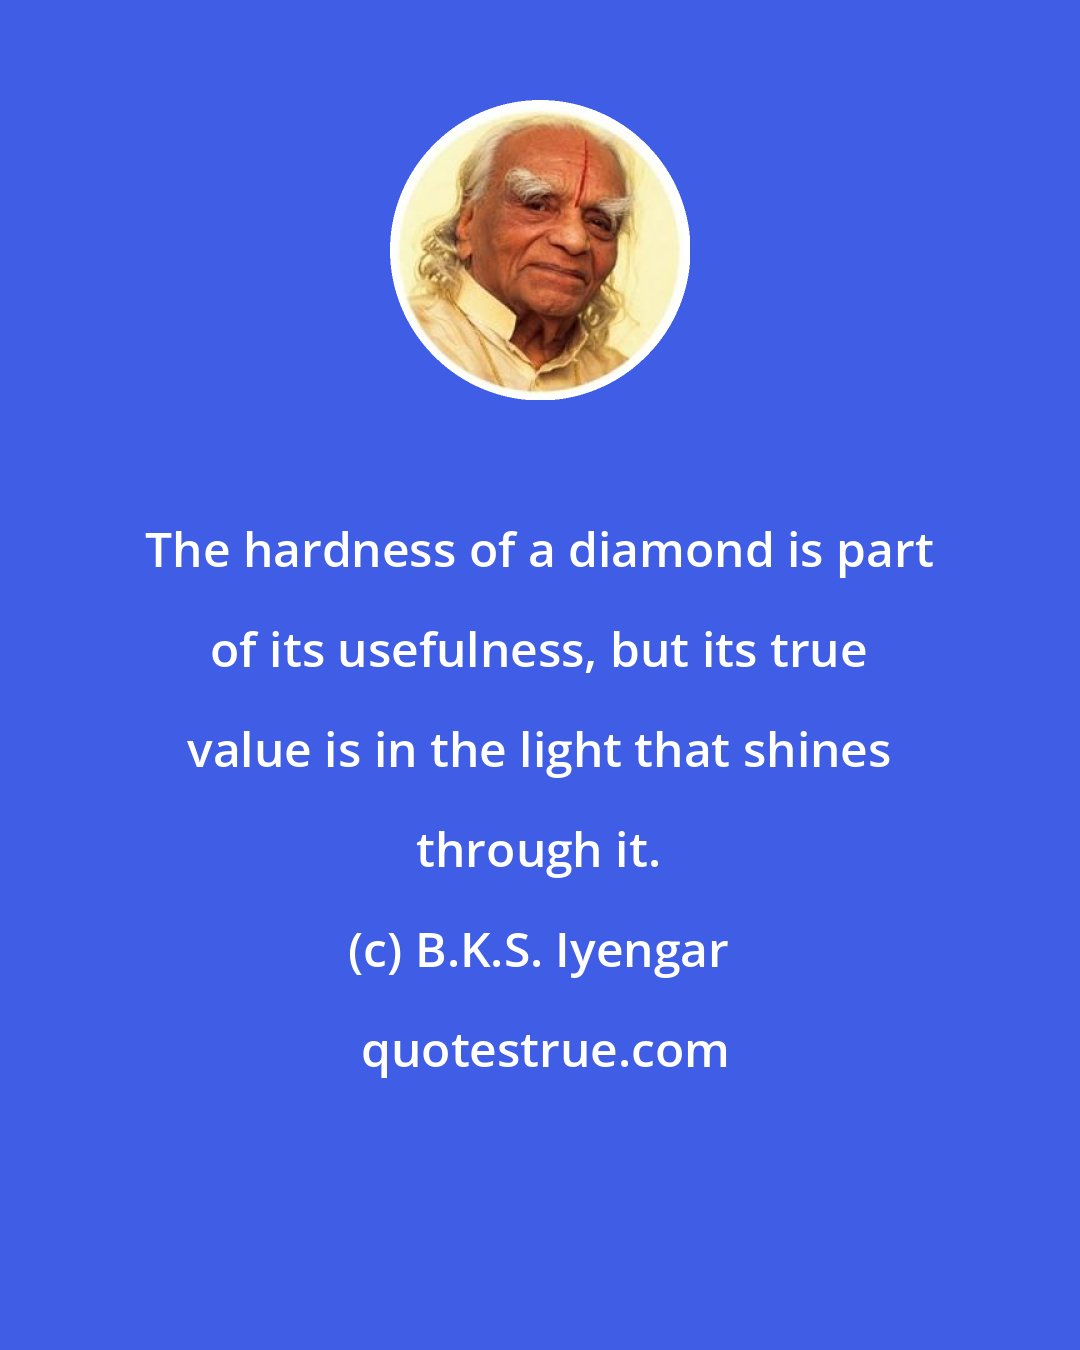 B.K.S. Iyengar: The hardness of a diamond is part of its usefulness, but its true value is in the light that shines through it.